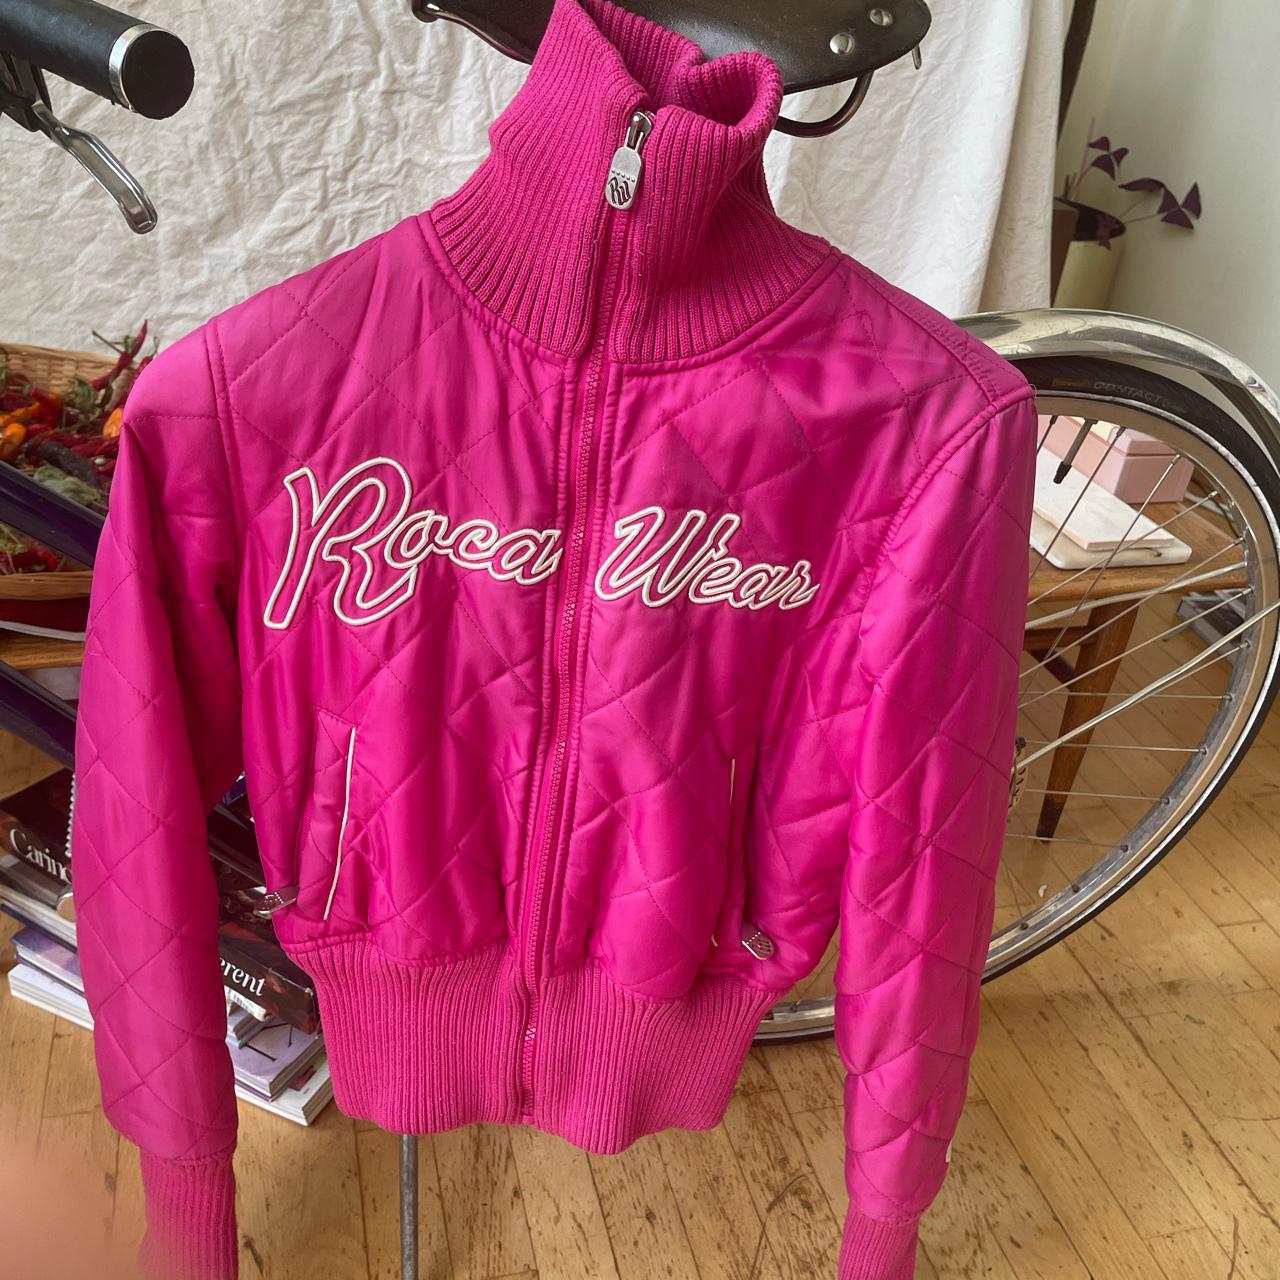 Rocawear Women's Pink and White Jacket | Depop